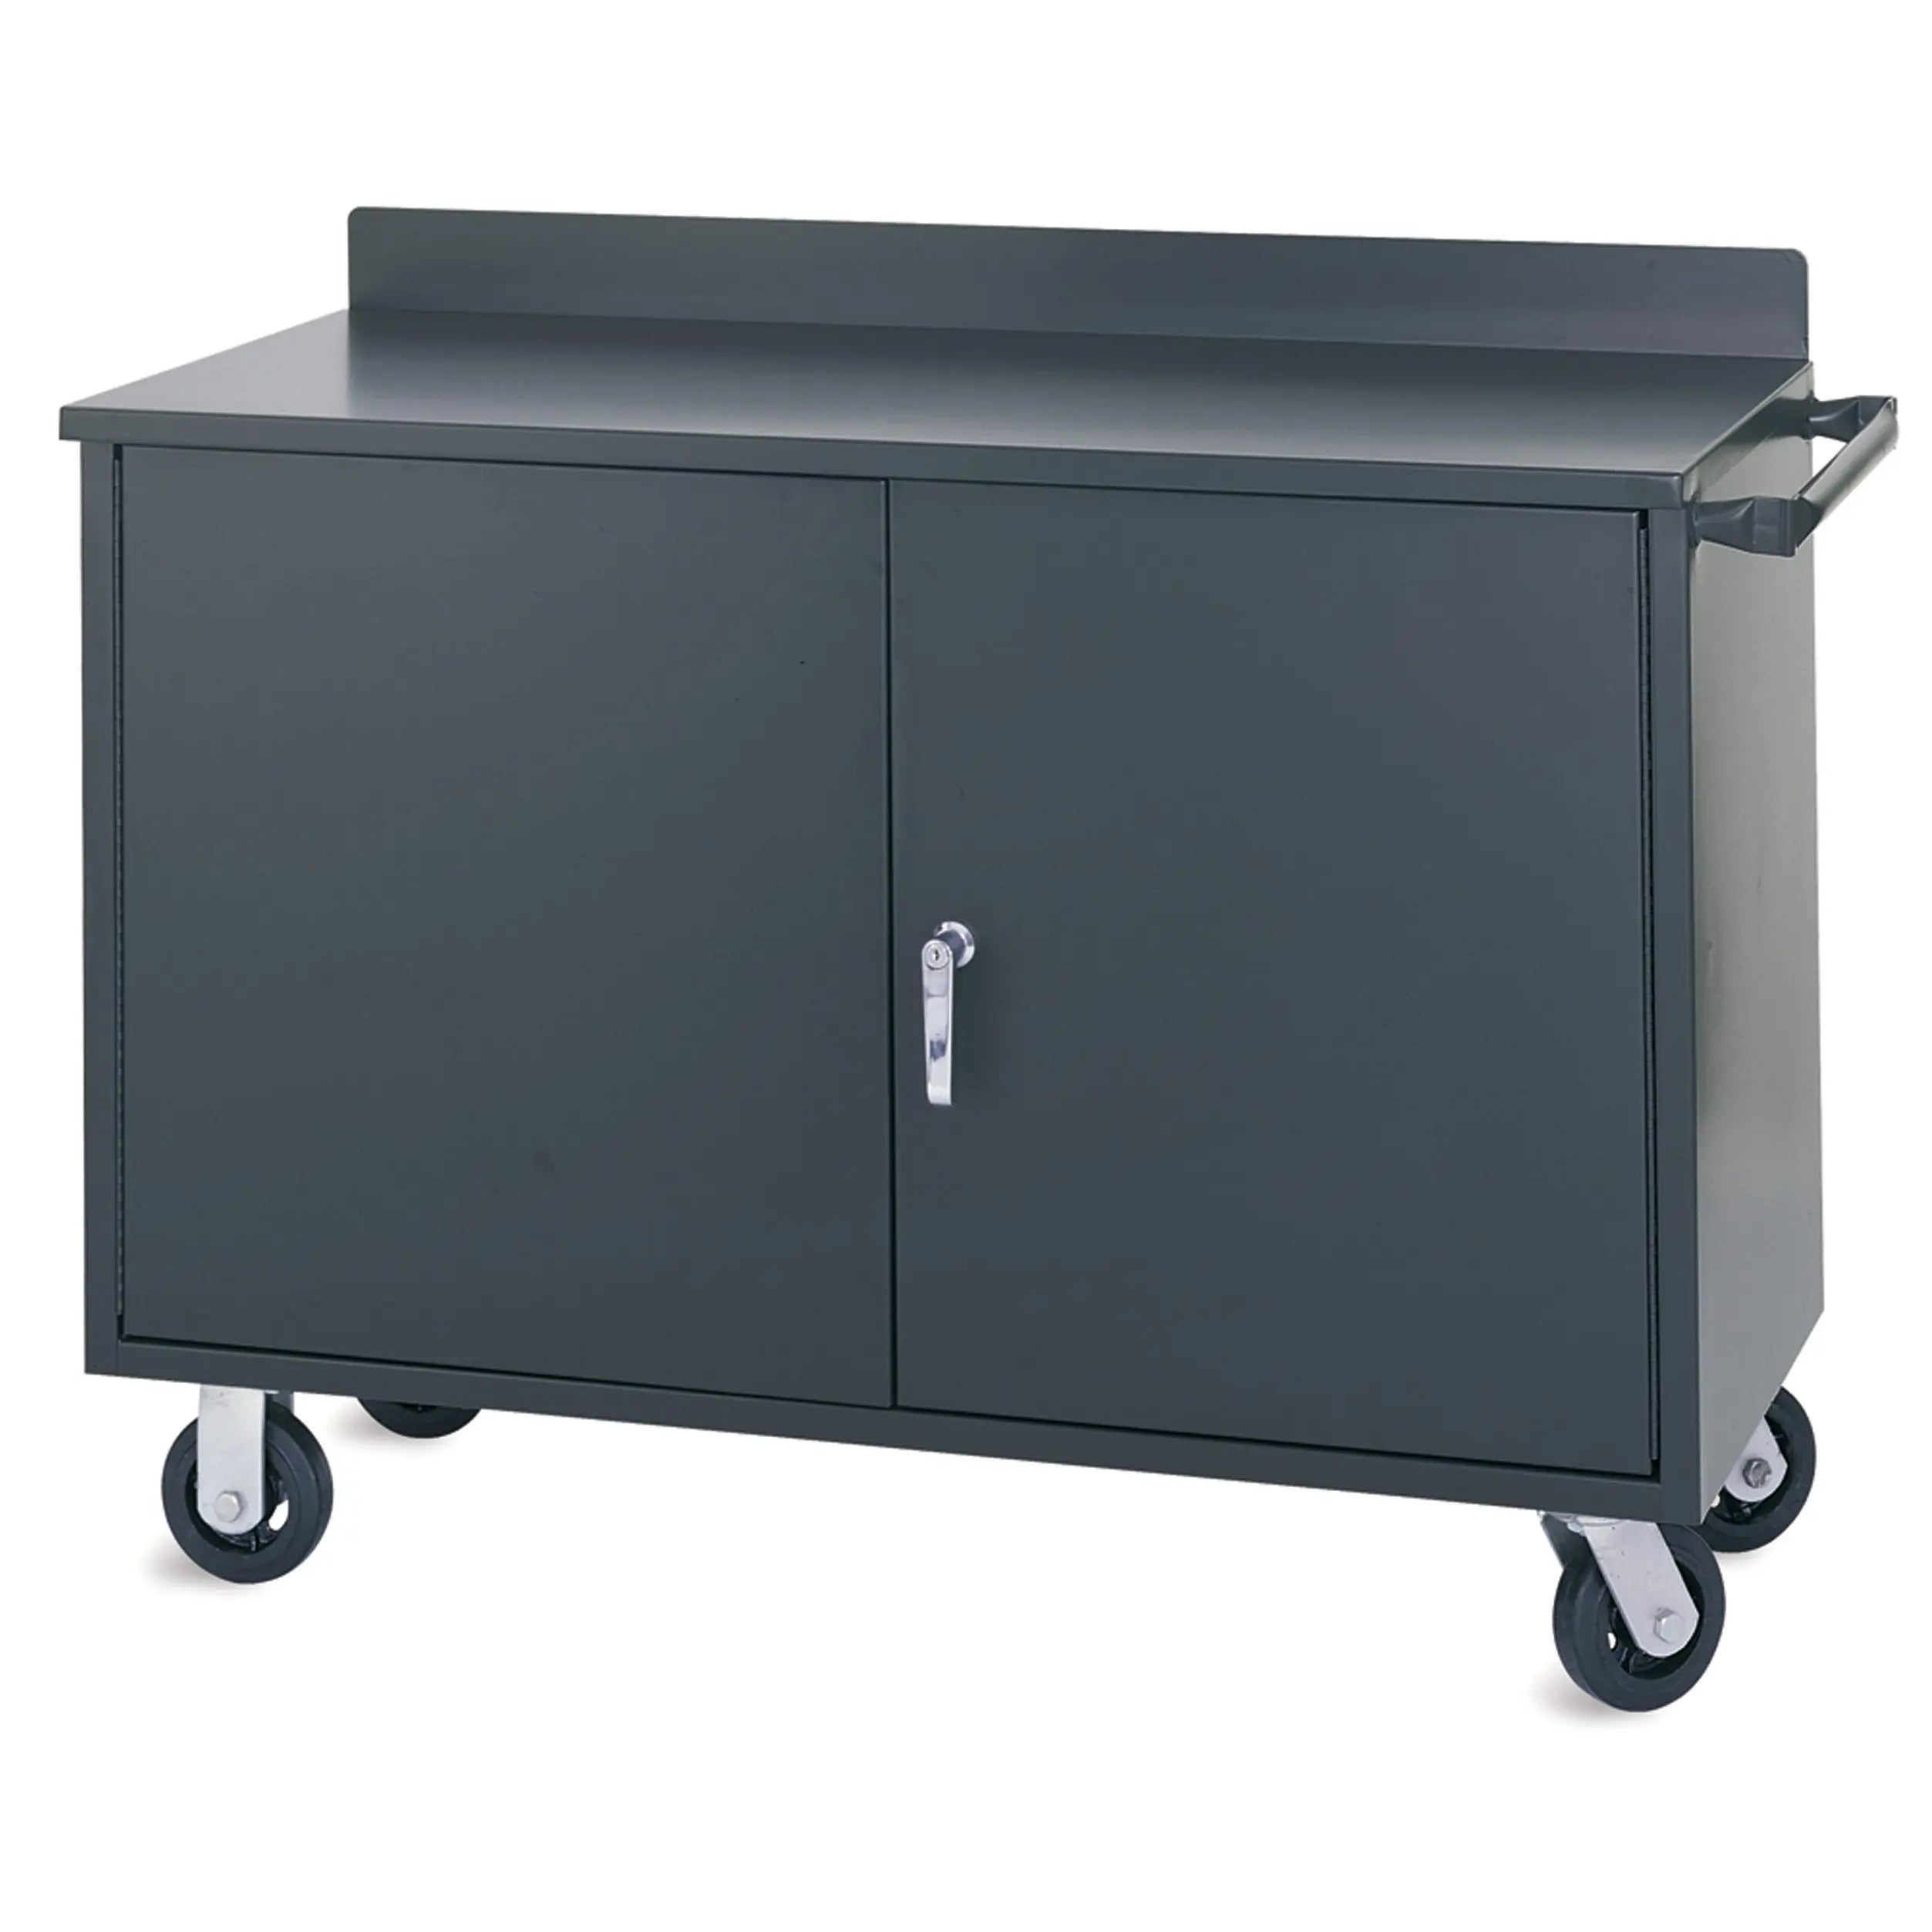 Valley Craft 23″ Industrial Workbenches - Warehouse Gear Hub 